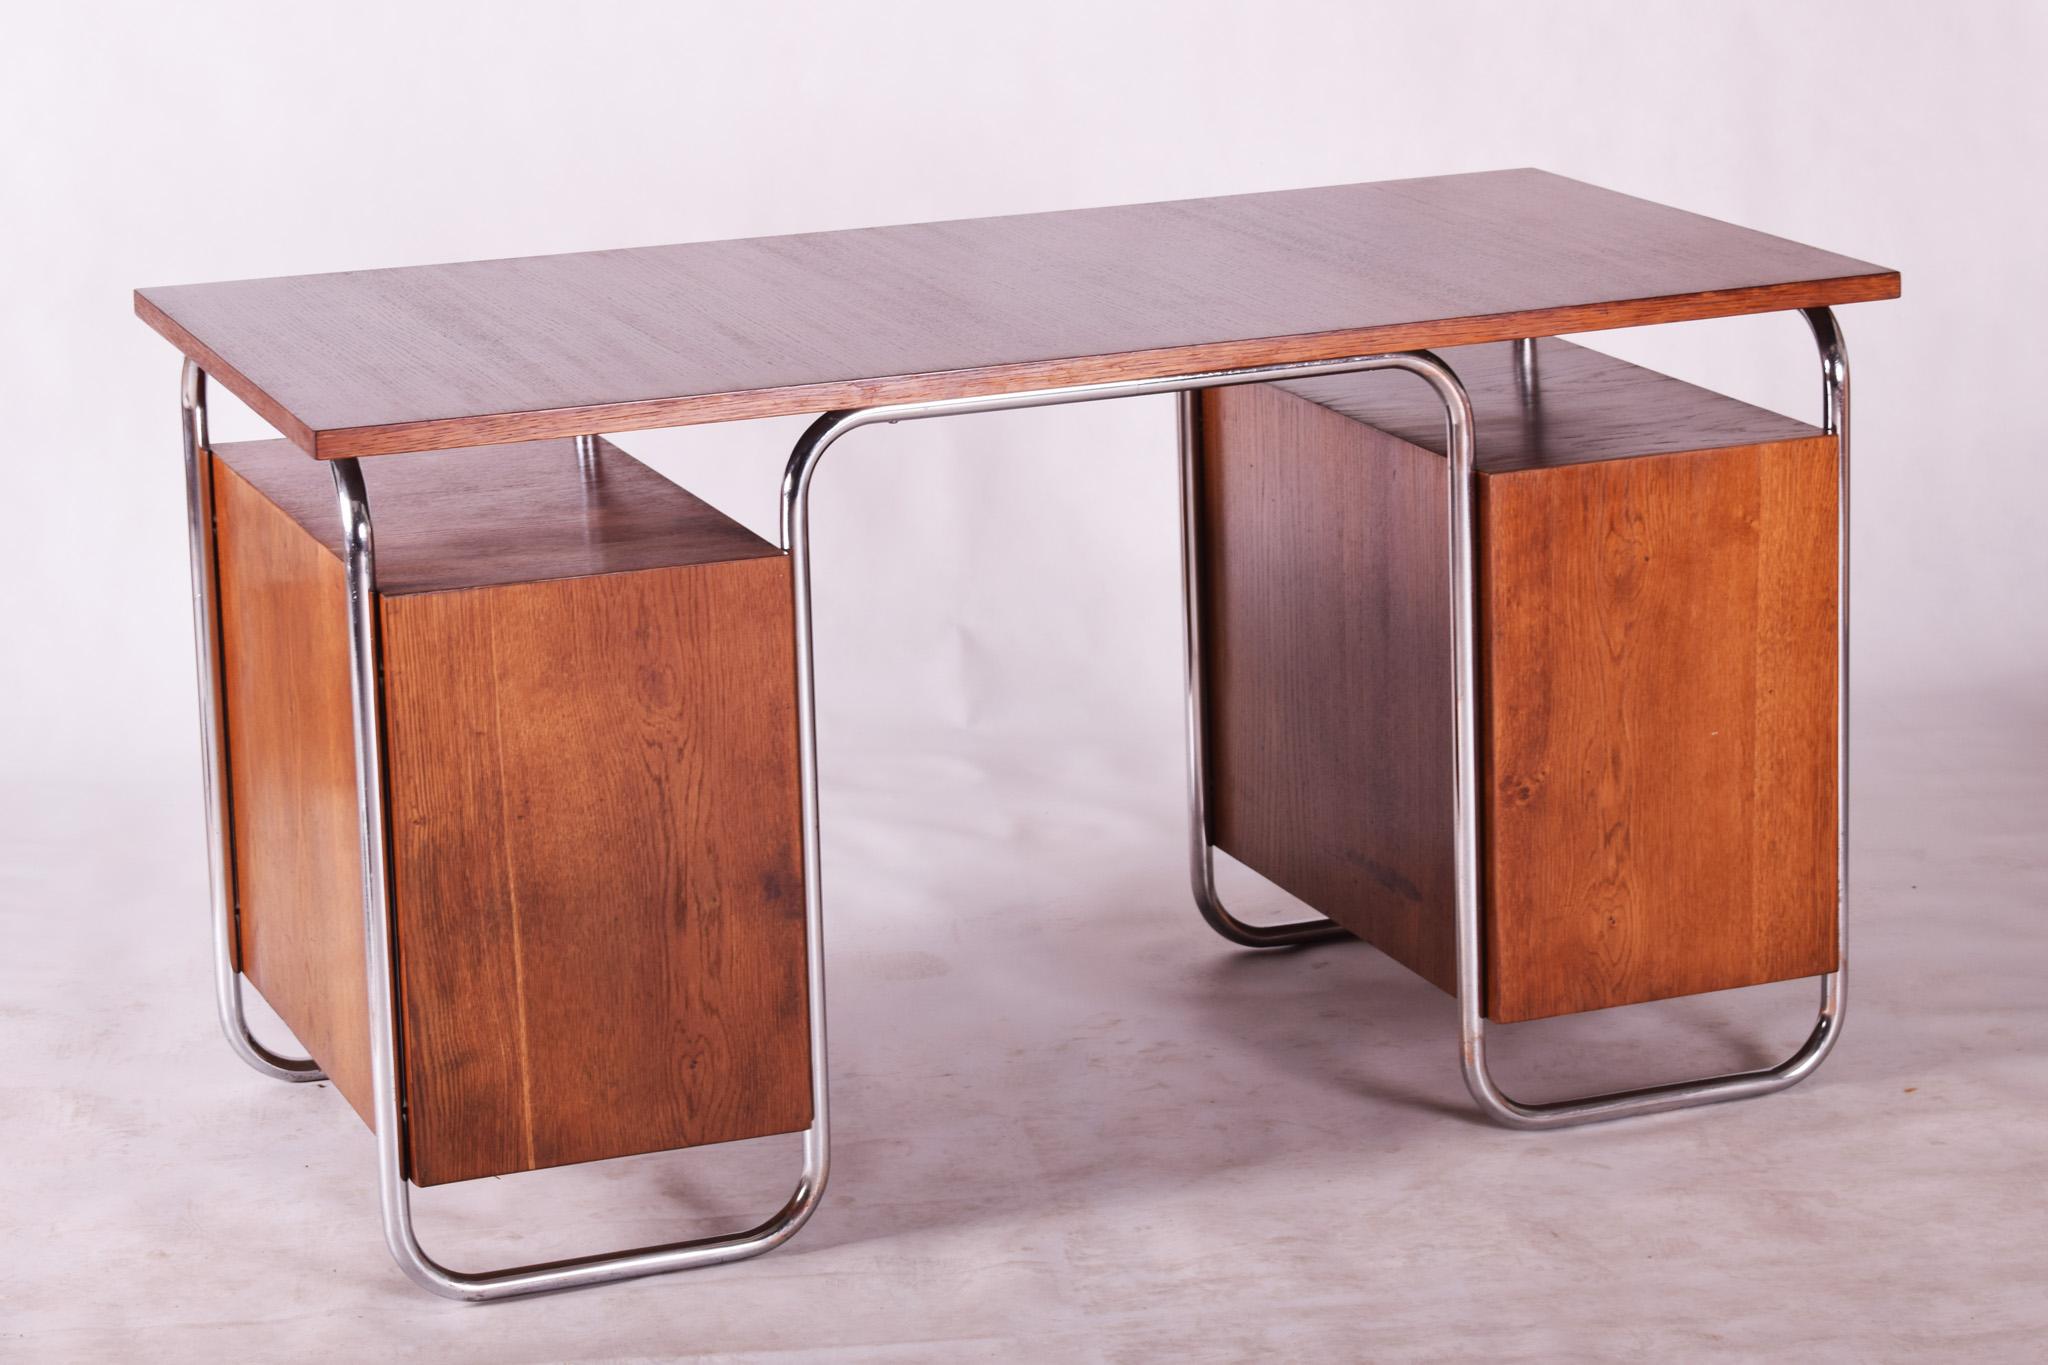 Oak Bauhaus Chrome Writing Desk by Thonet, Good Condition and Patina, 1930s 1